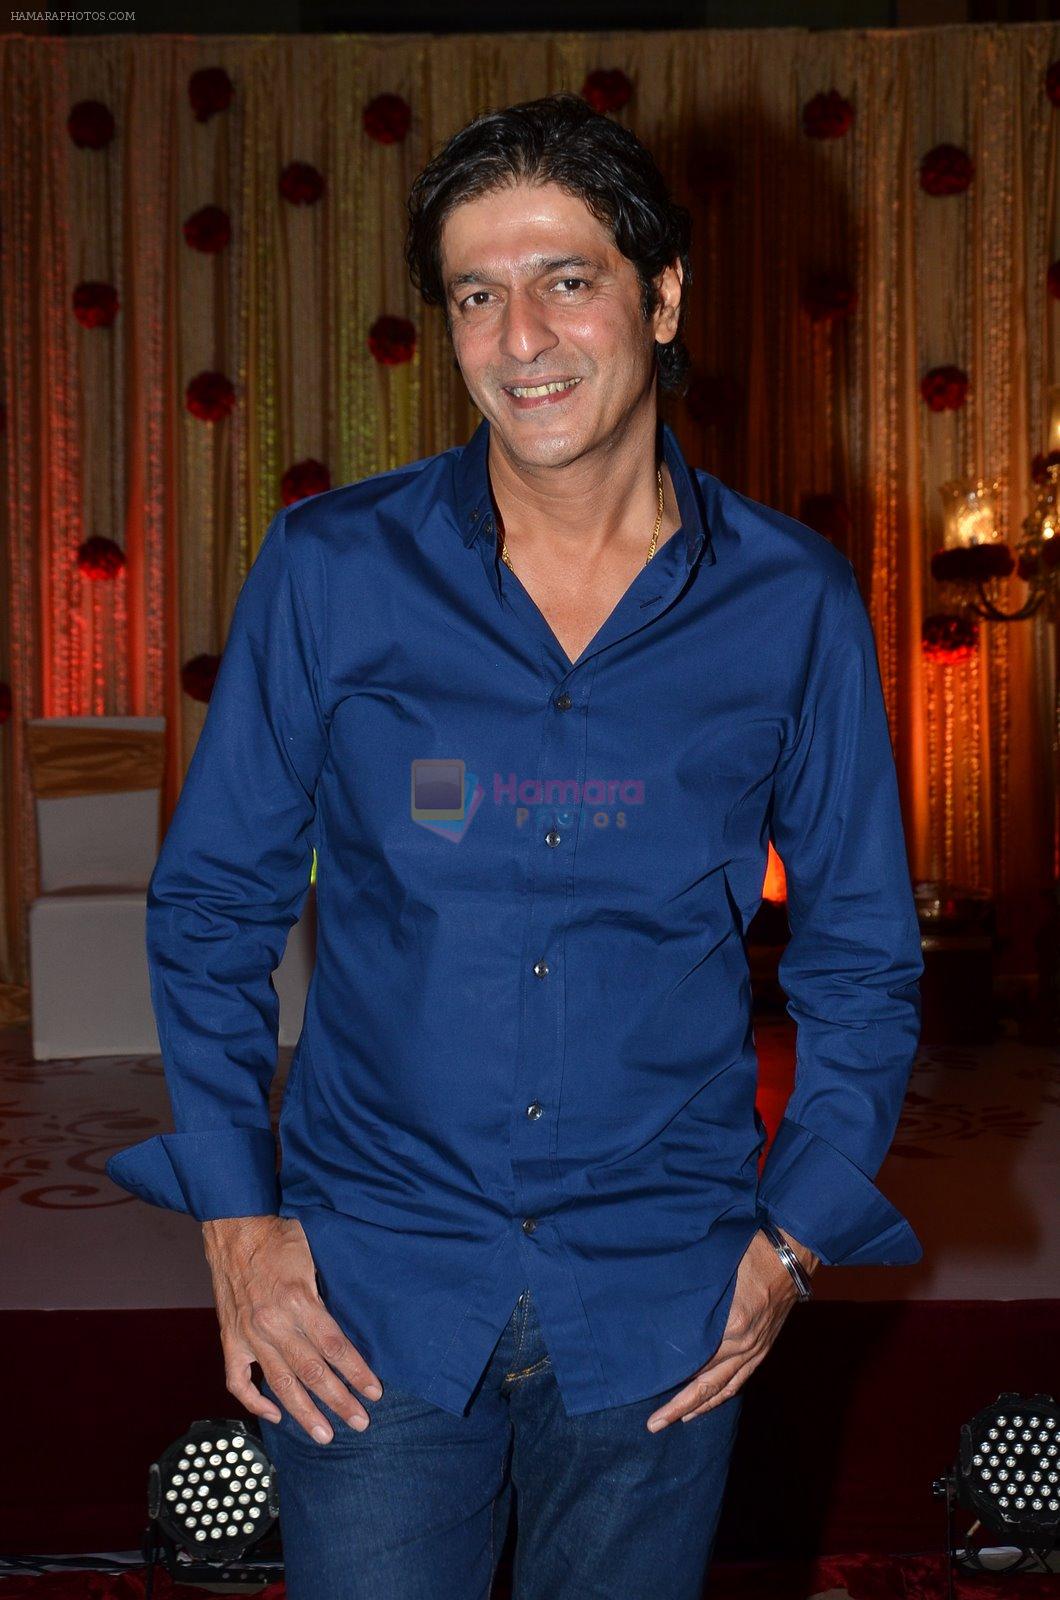 Chunky Pandey at Vikram Singh's Brother Uday and Ali Morani's daughter Shirin's Sangeet Ceremony in Blue sea on 20th Dec 2014